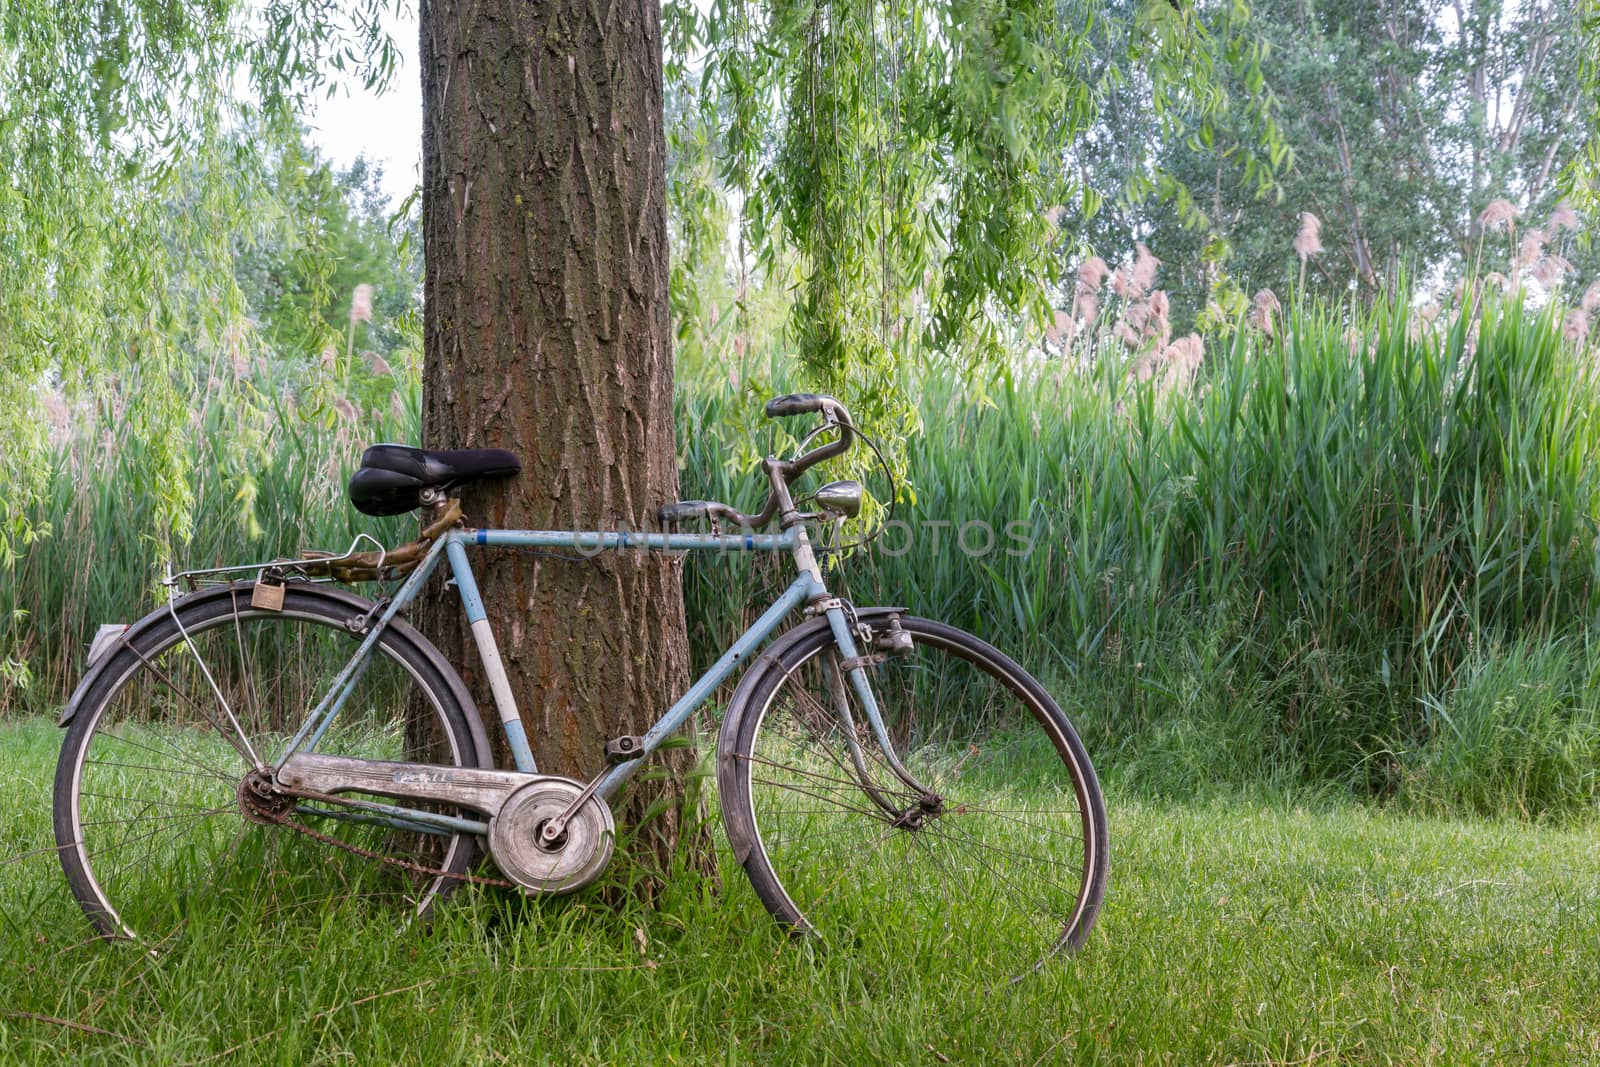 Bicycle under a tree in an italian garden by enrico.lapponi